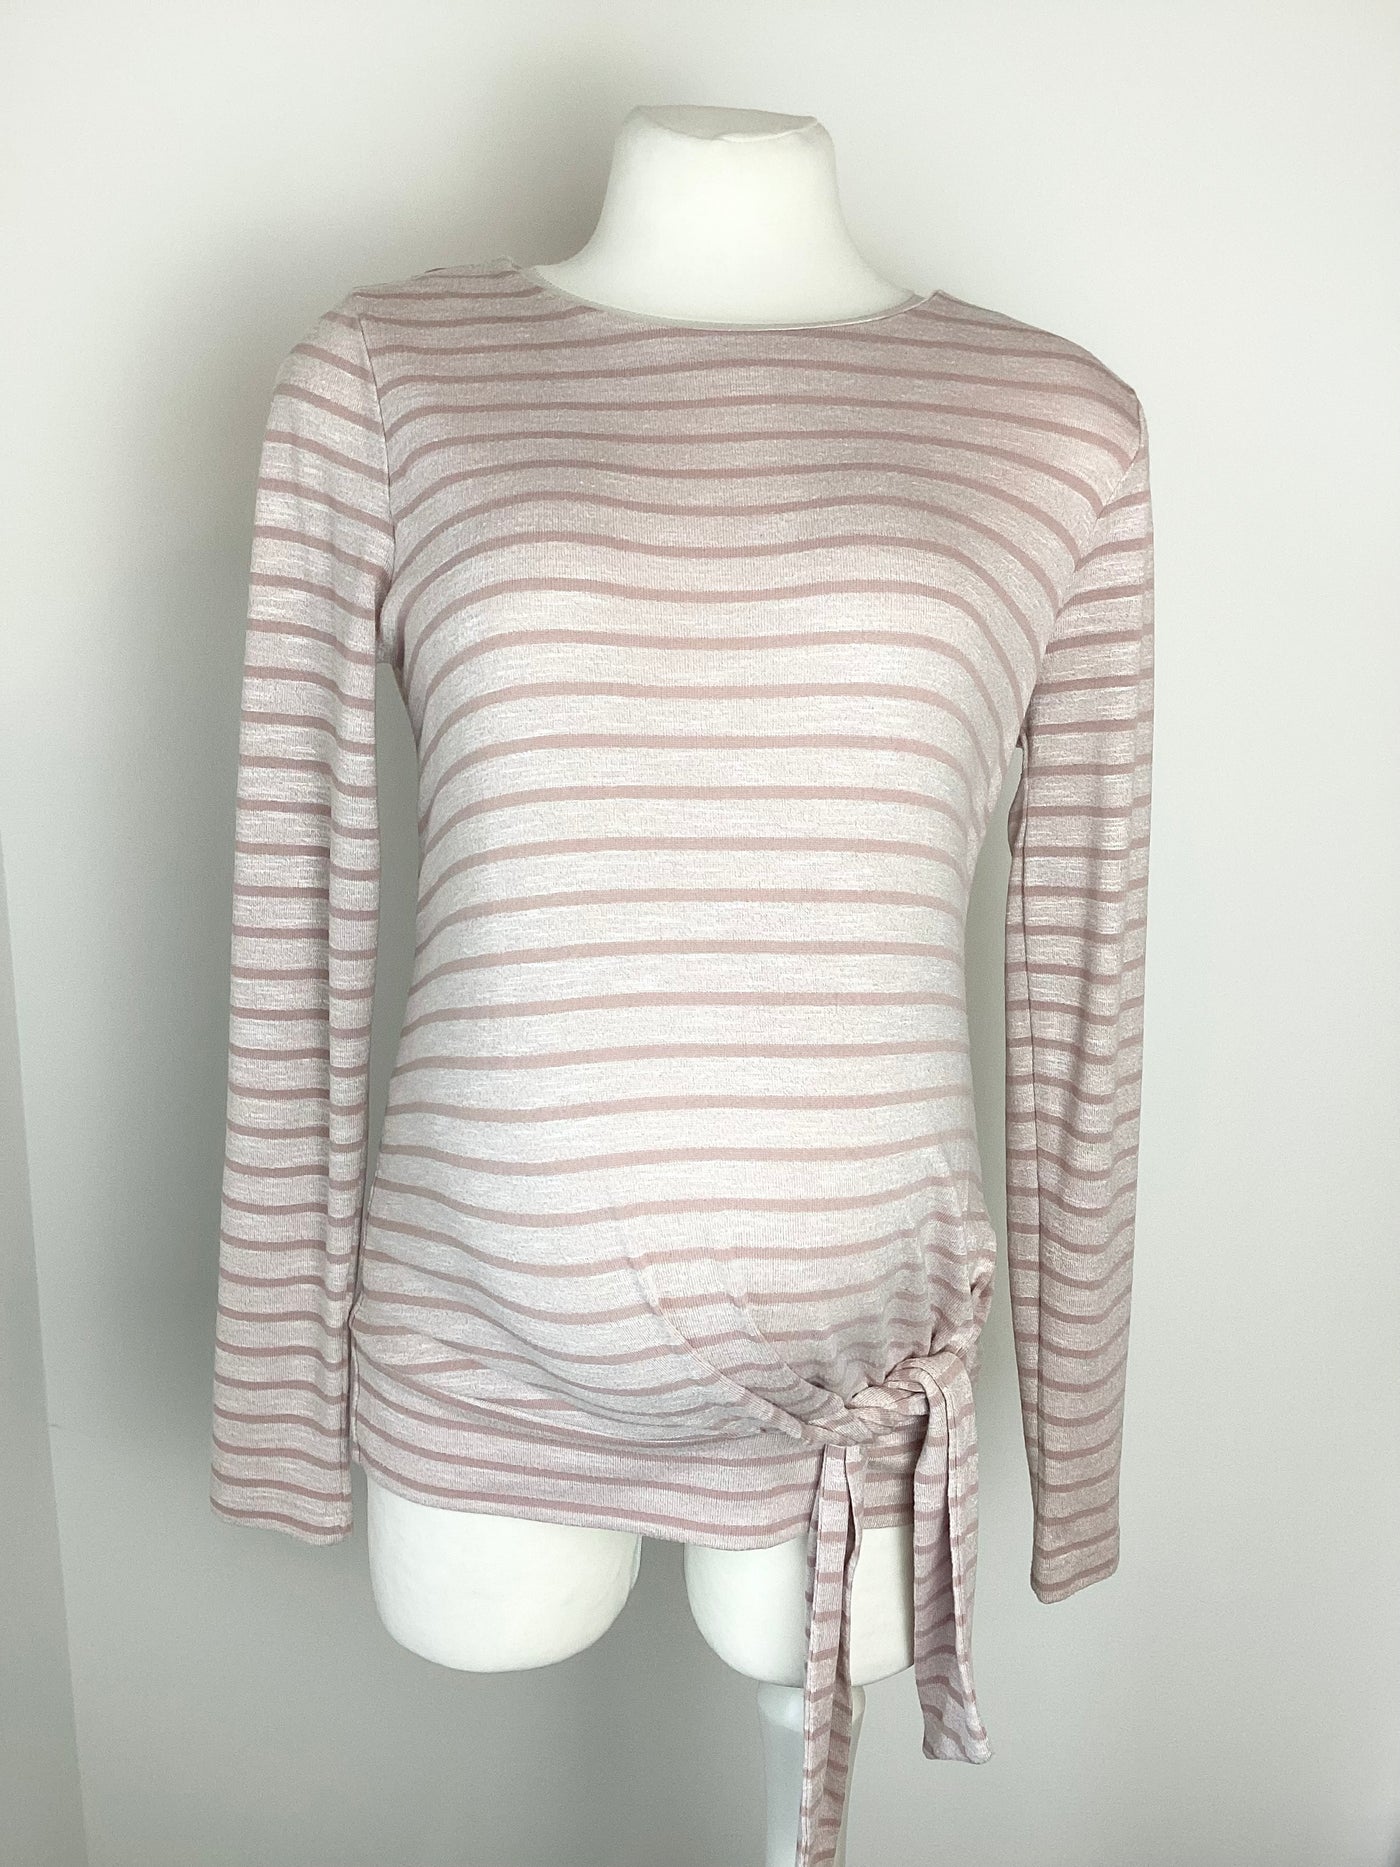 M&S Mum light pink striped long sleeve top with front tie - Size 10